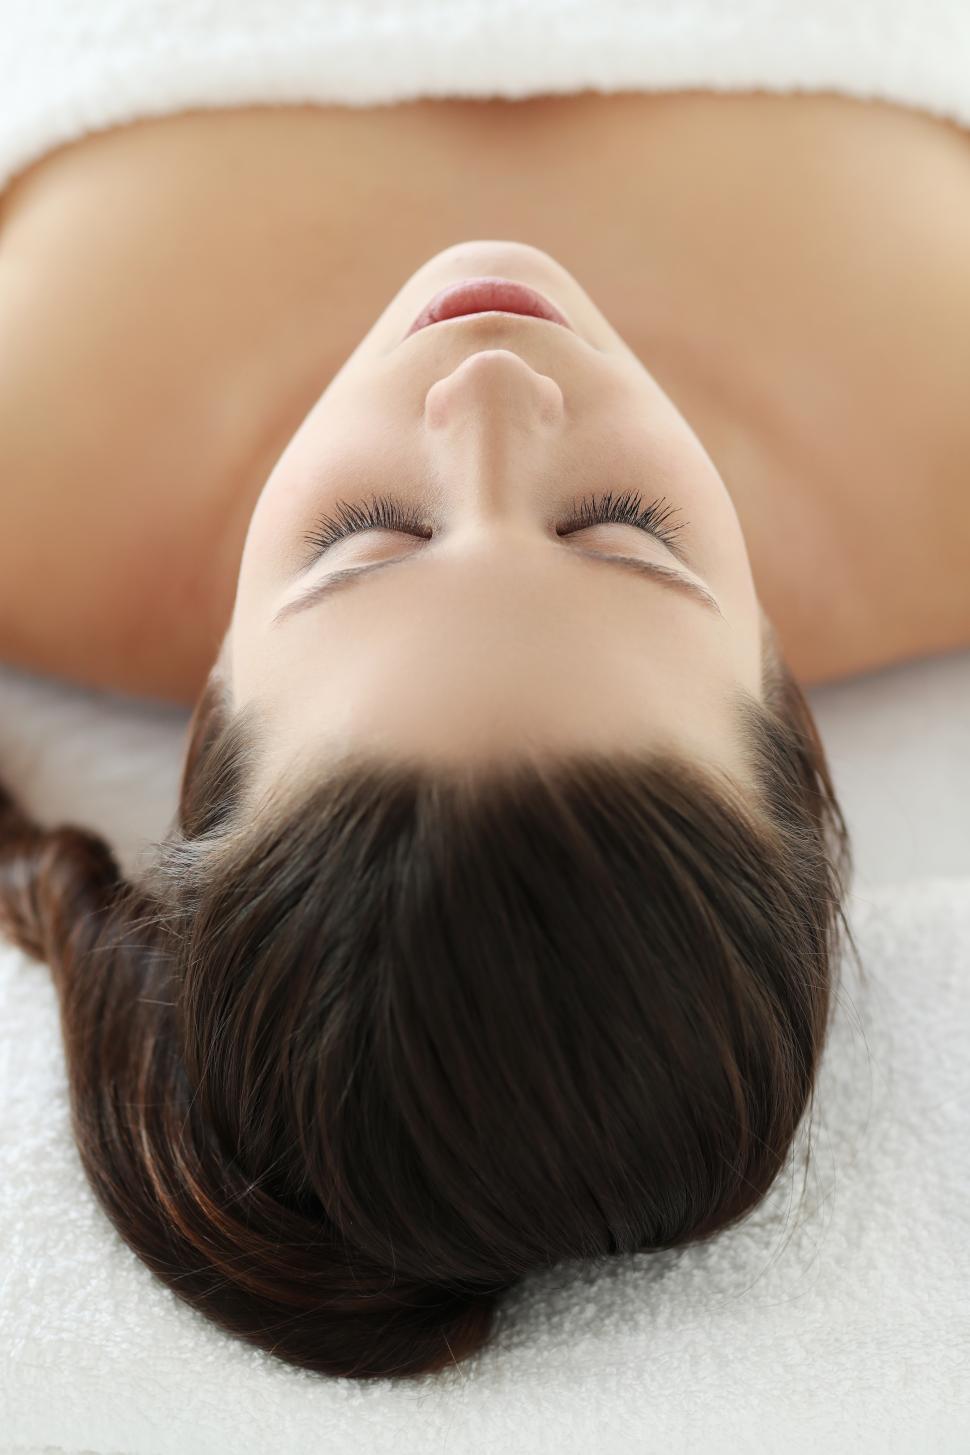 Free Image of Woman laying down on spa treatment table 